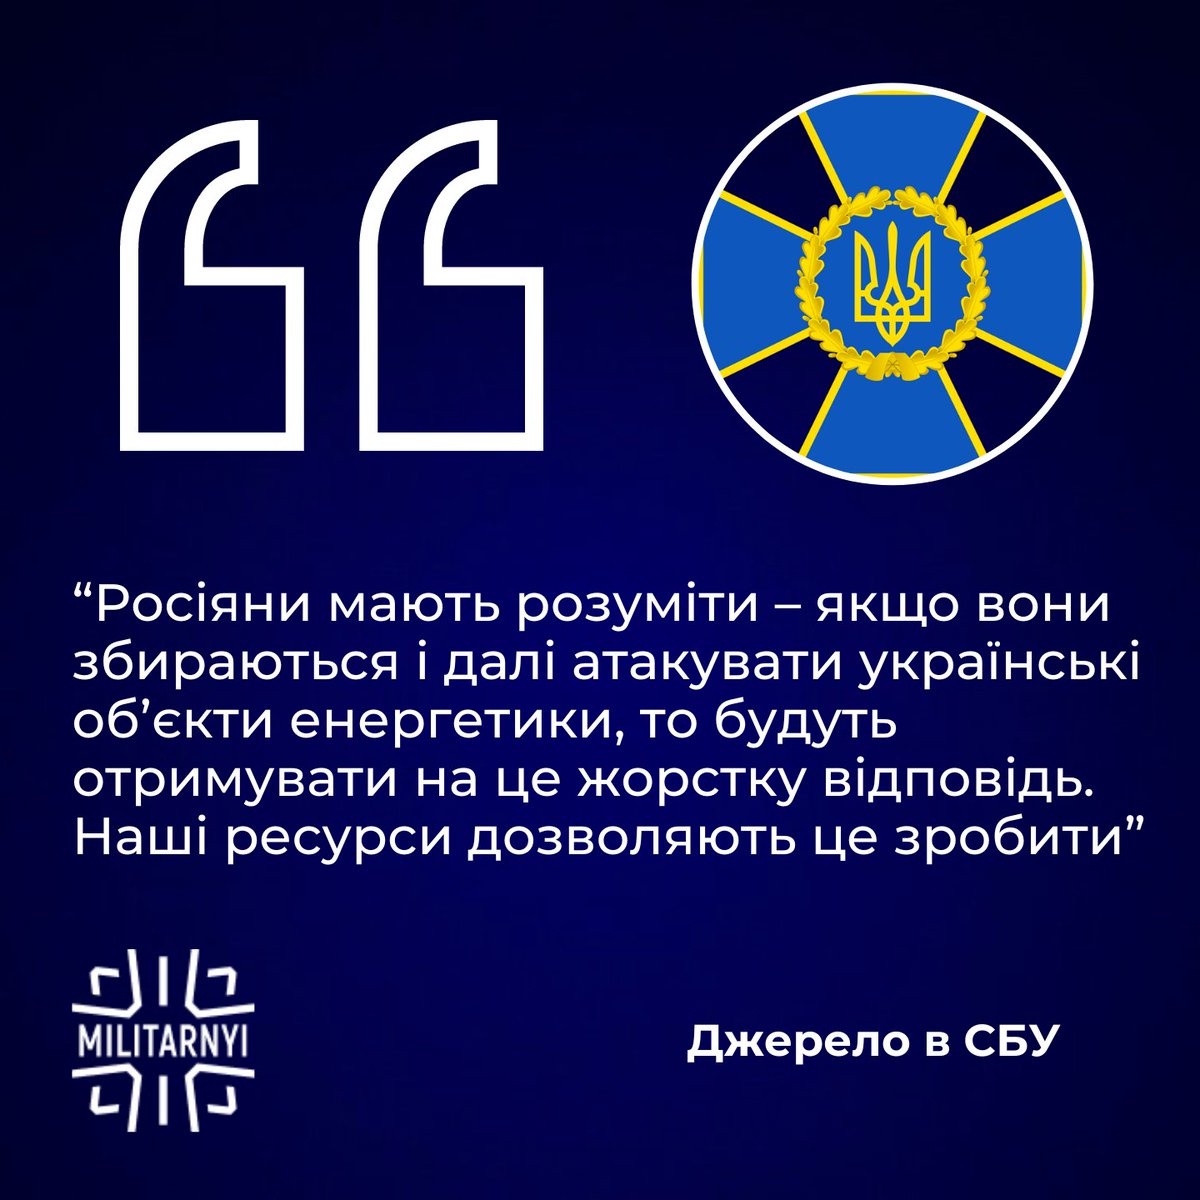 Security Service of Ukraine promises harsh response against Russian electrical power systems, in case of attacks against Ukrainian power system this winter